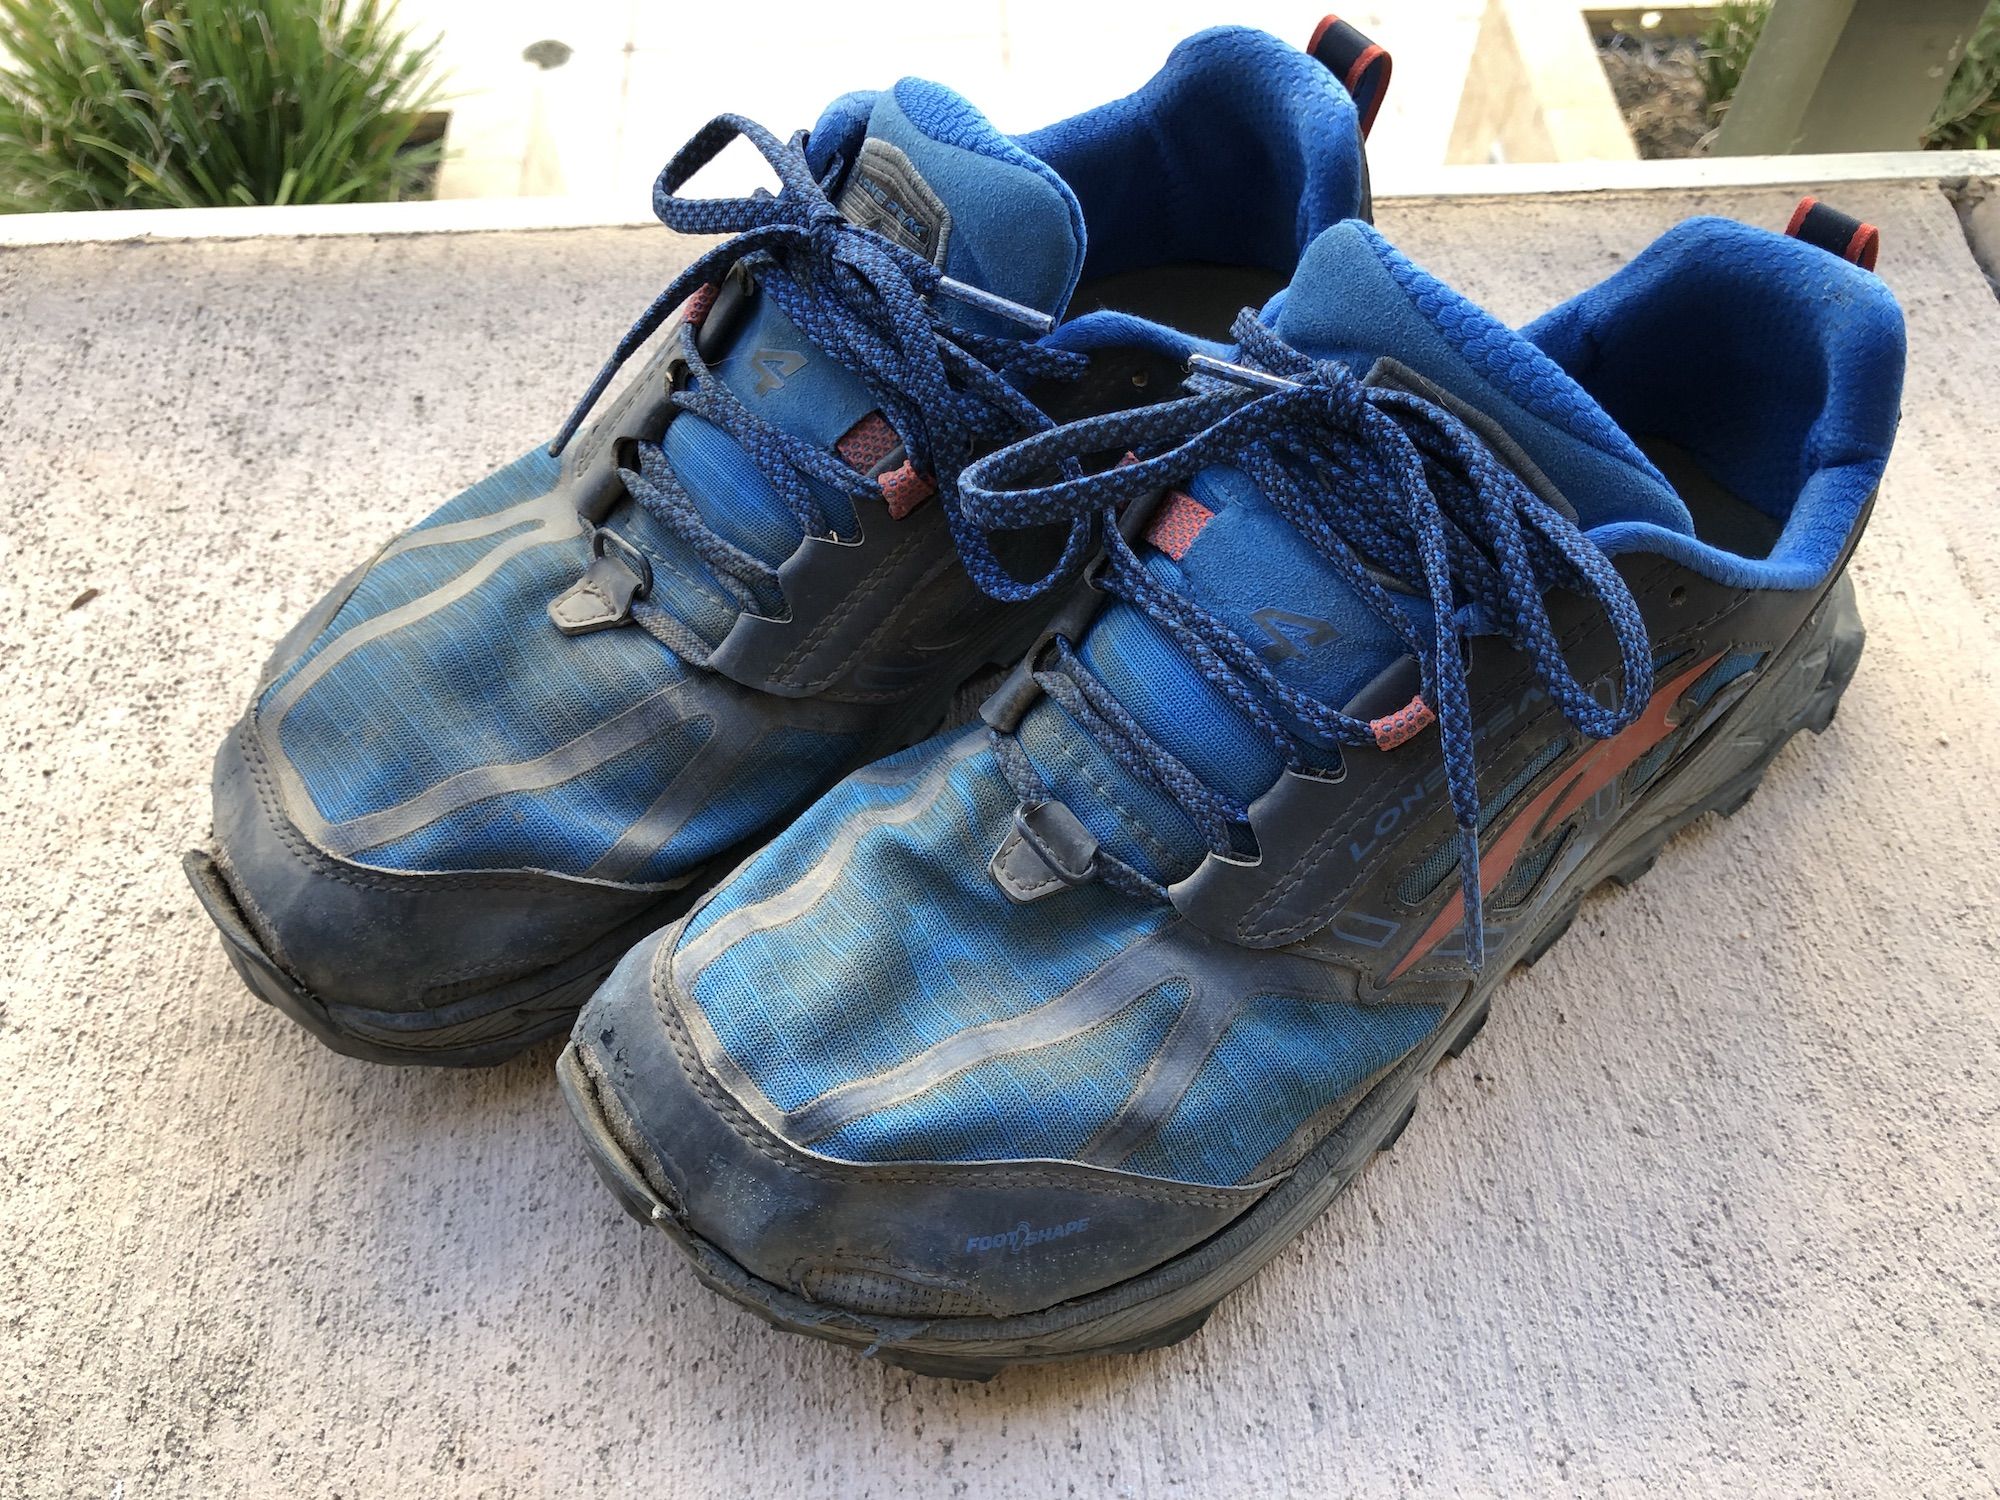 A worn pair of shoes with lose pieces.